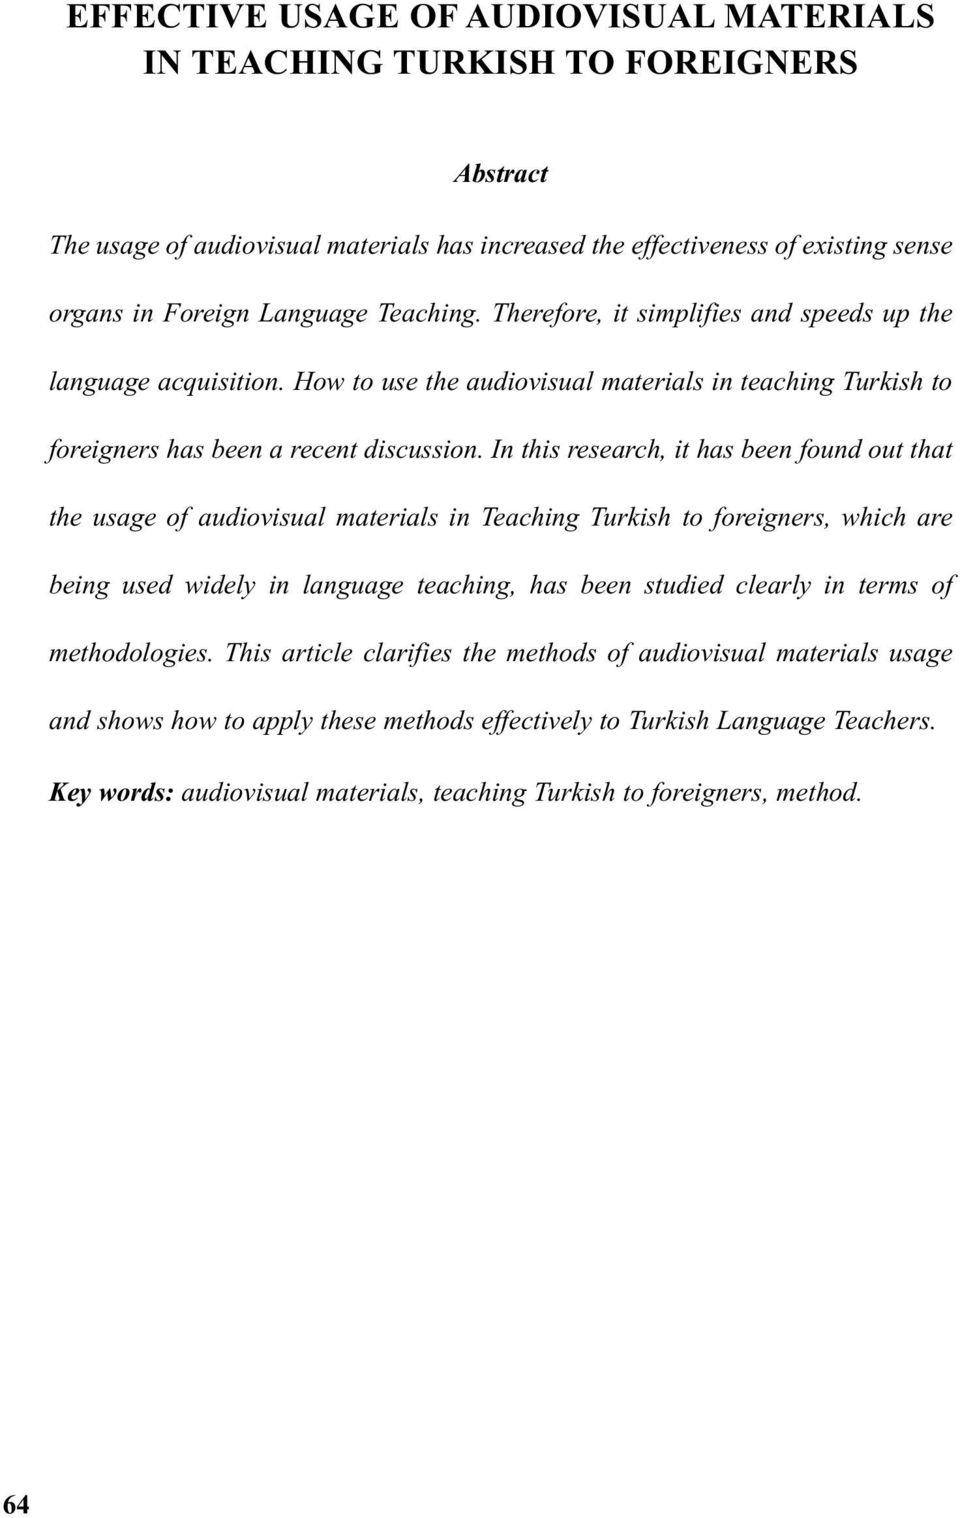 In this research, it has been found out that the usage of audiovisual materials in Teaching Turkish to foreigners, which are being used widely in language teaching, has been studied clearly in terms